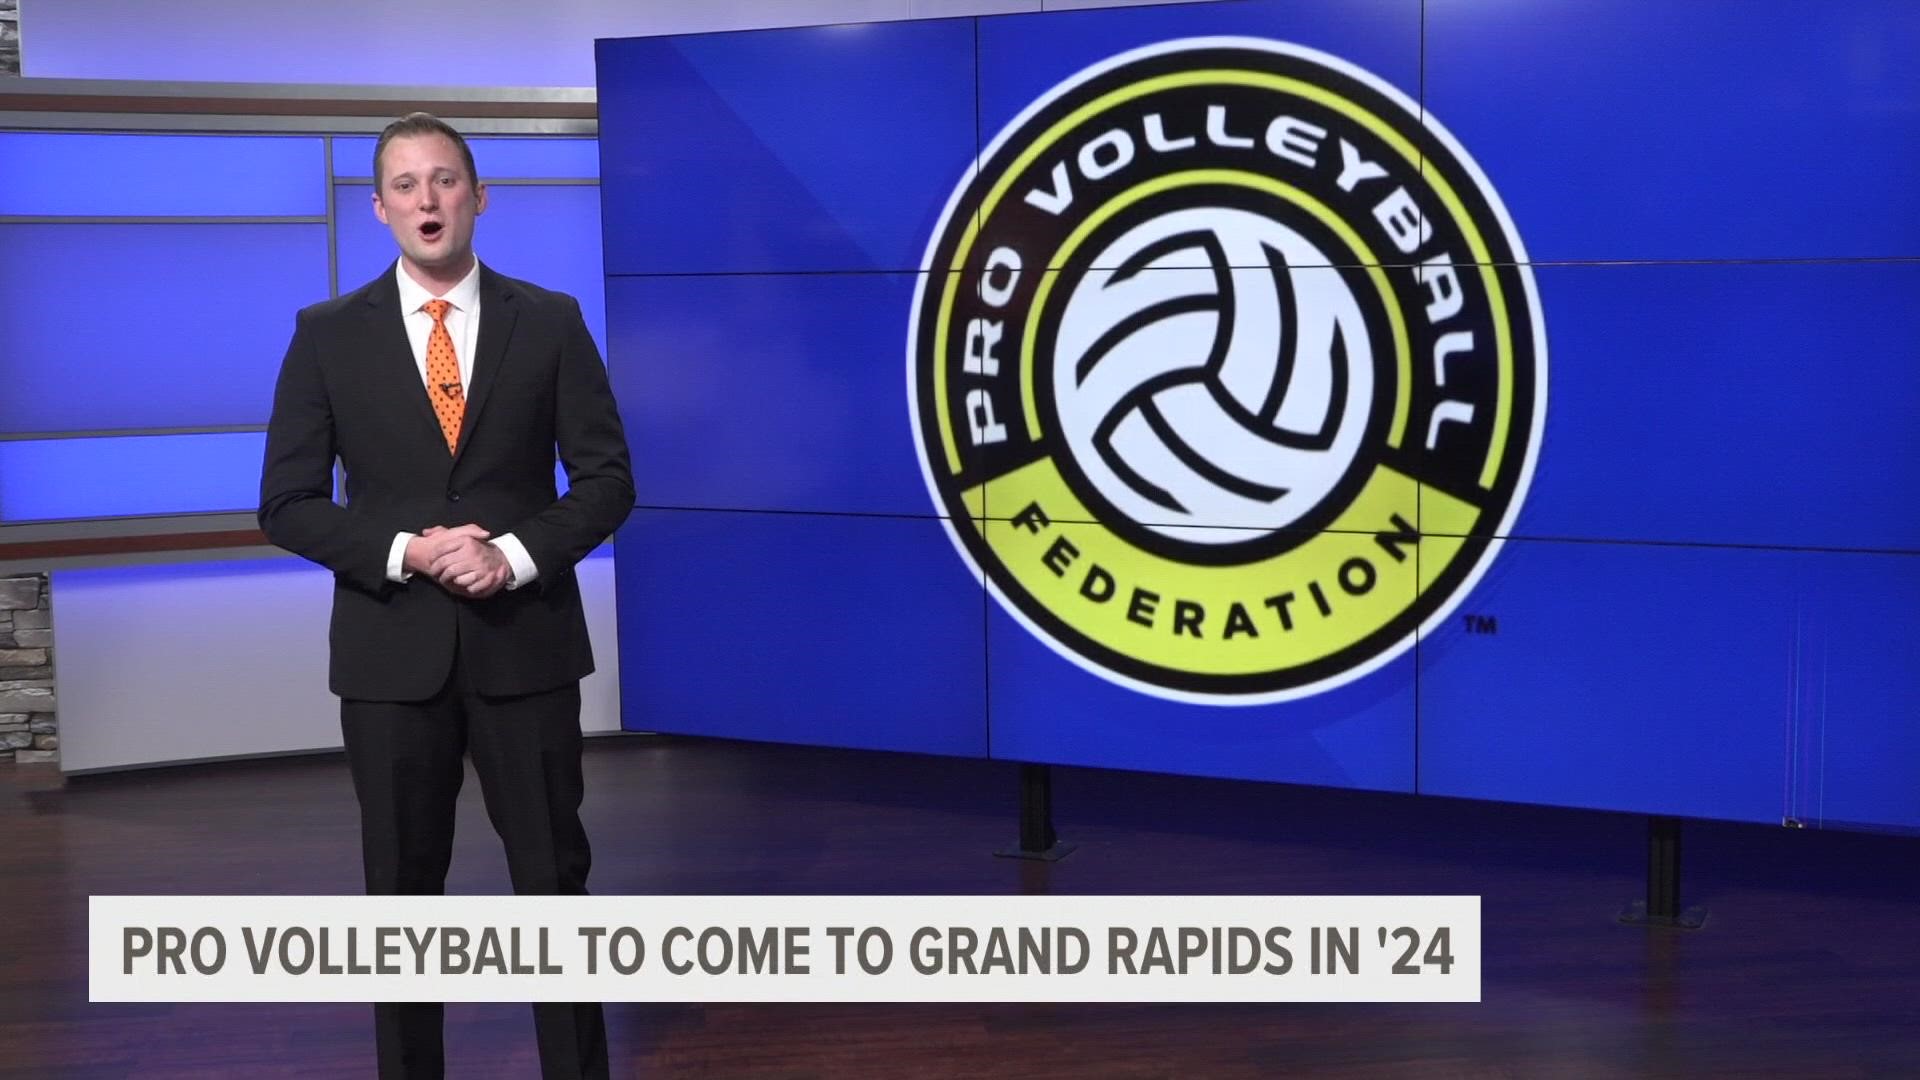 A new professional sports team is coming to Grand Rapids.